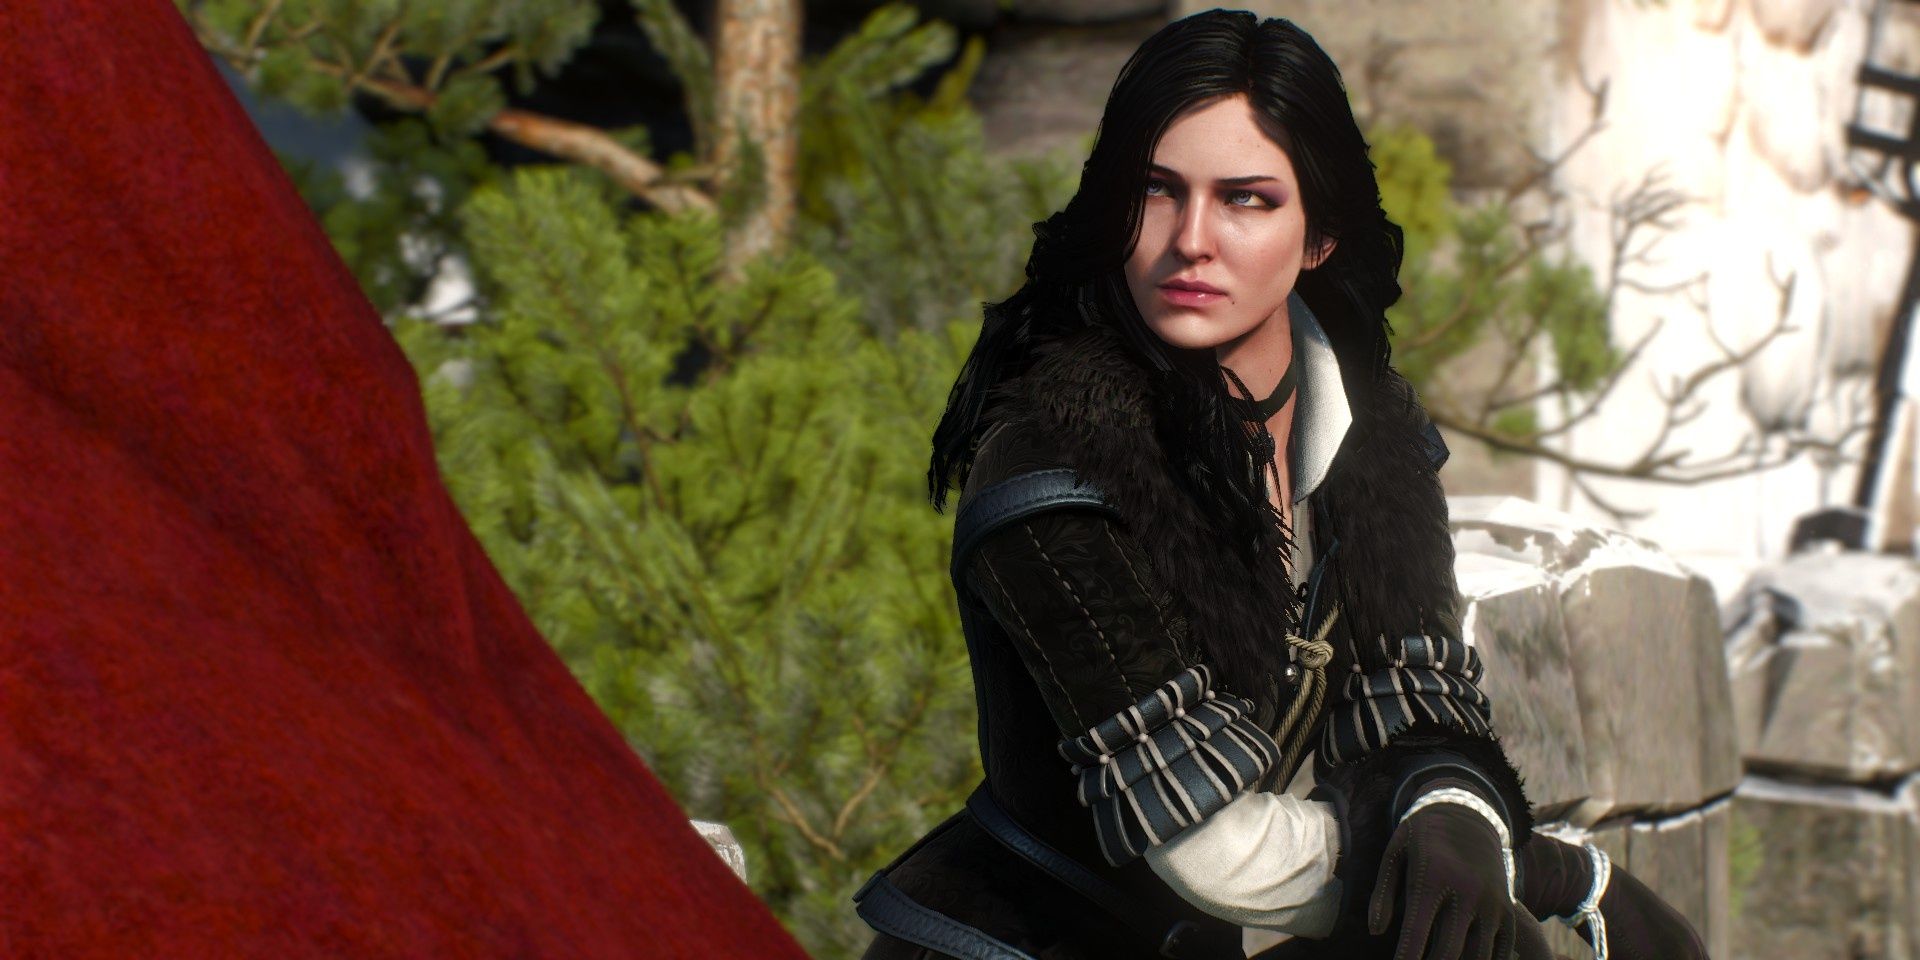 yennefer casting a stern look while sitting with her arms crossed over her lap